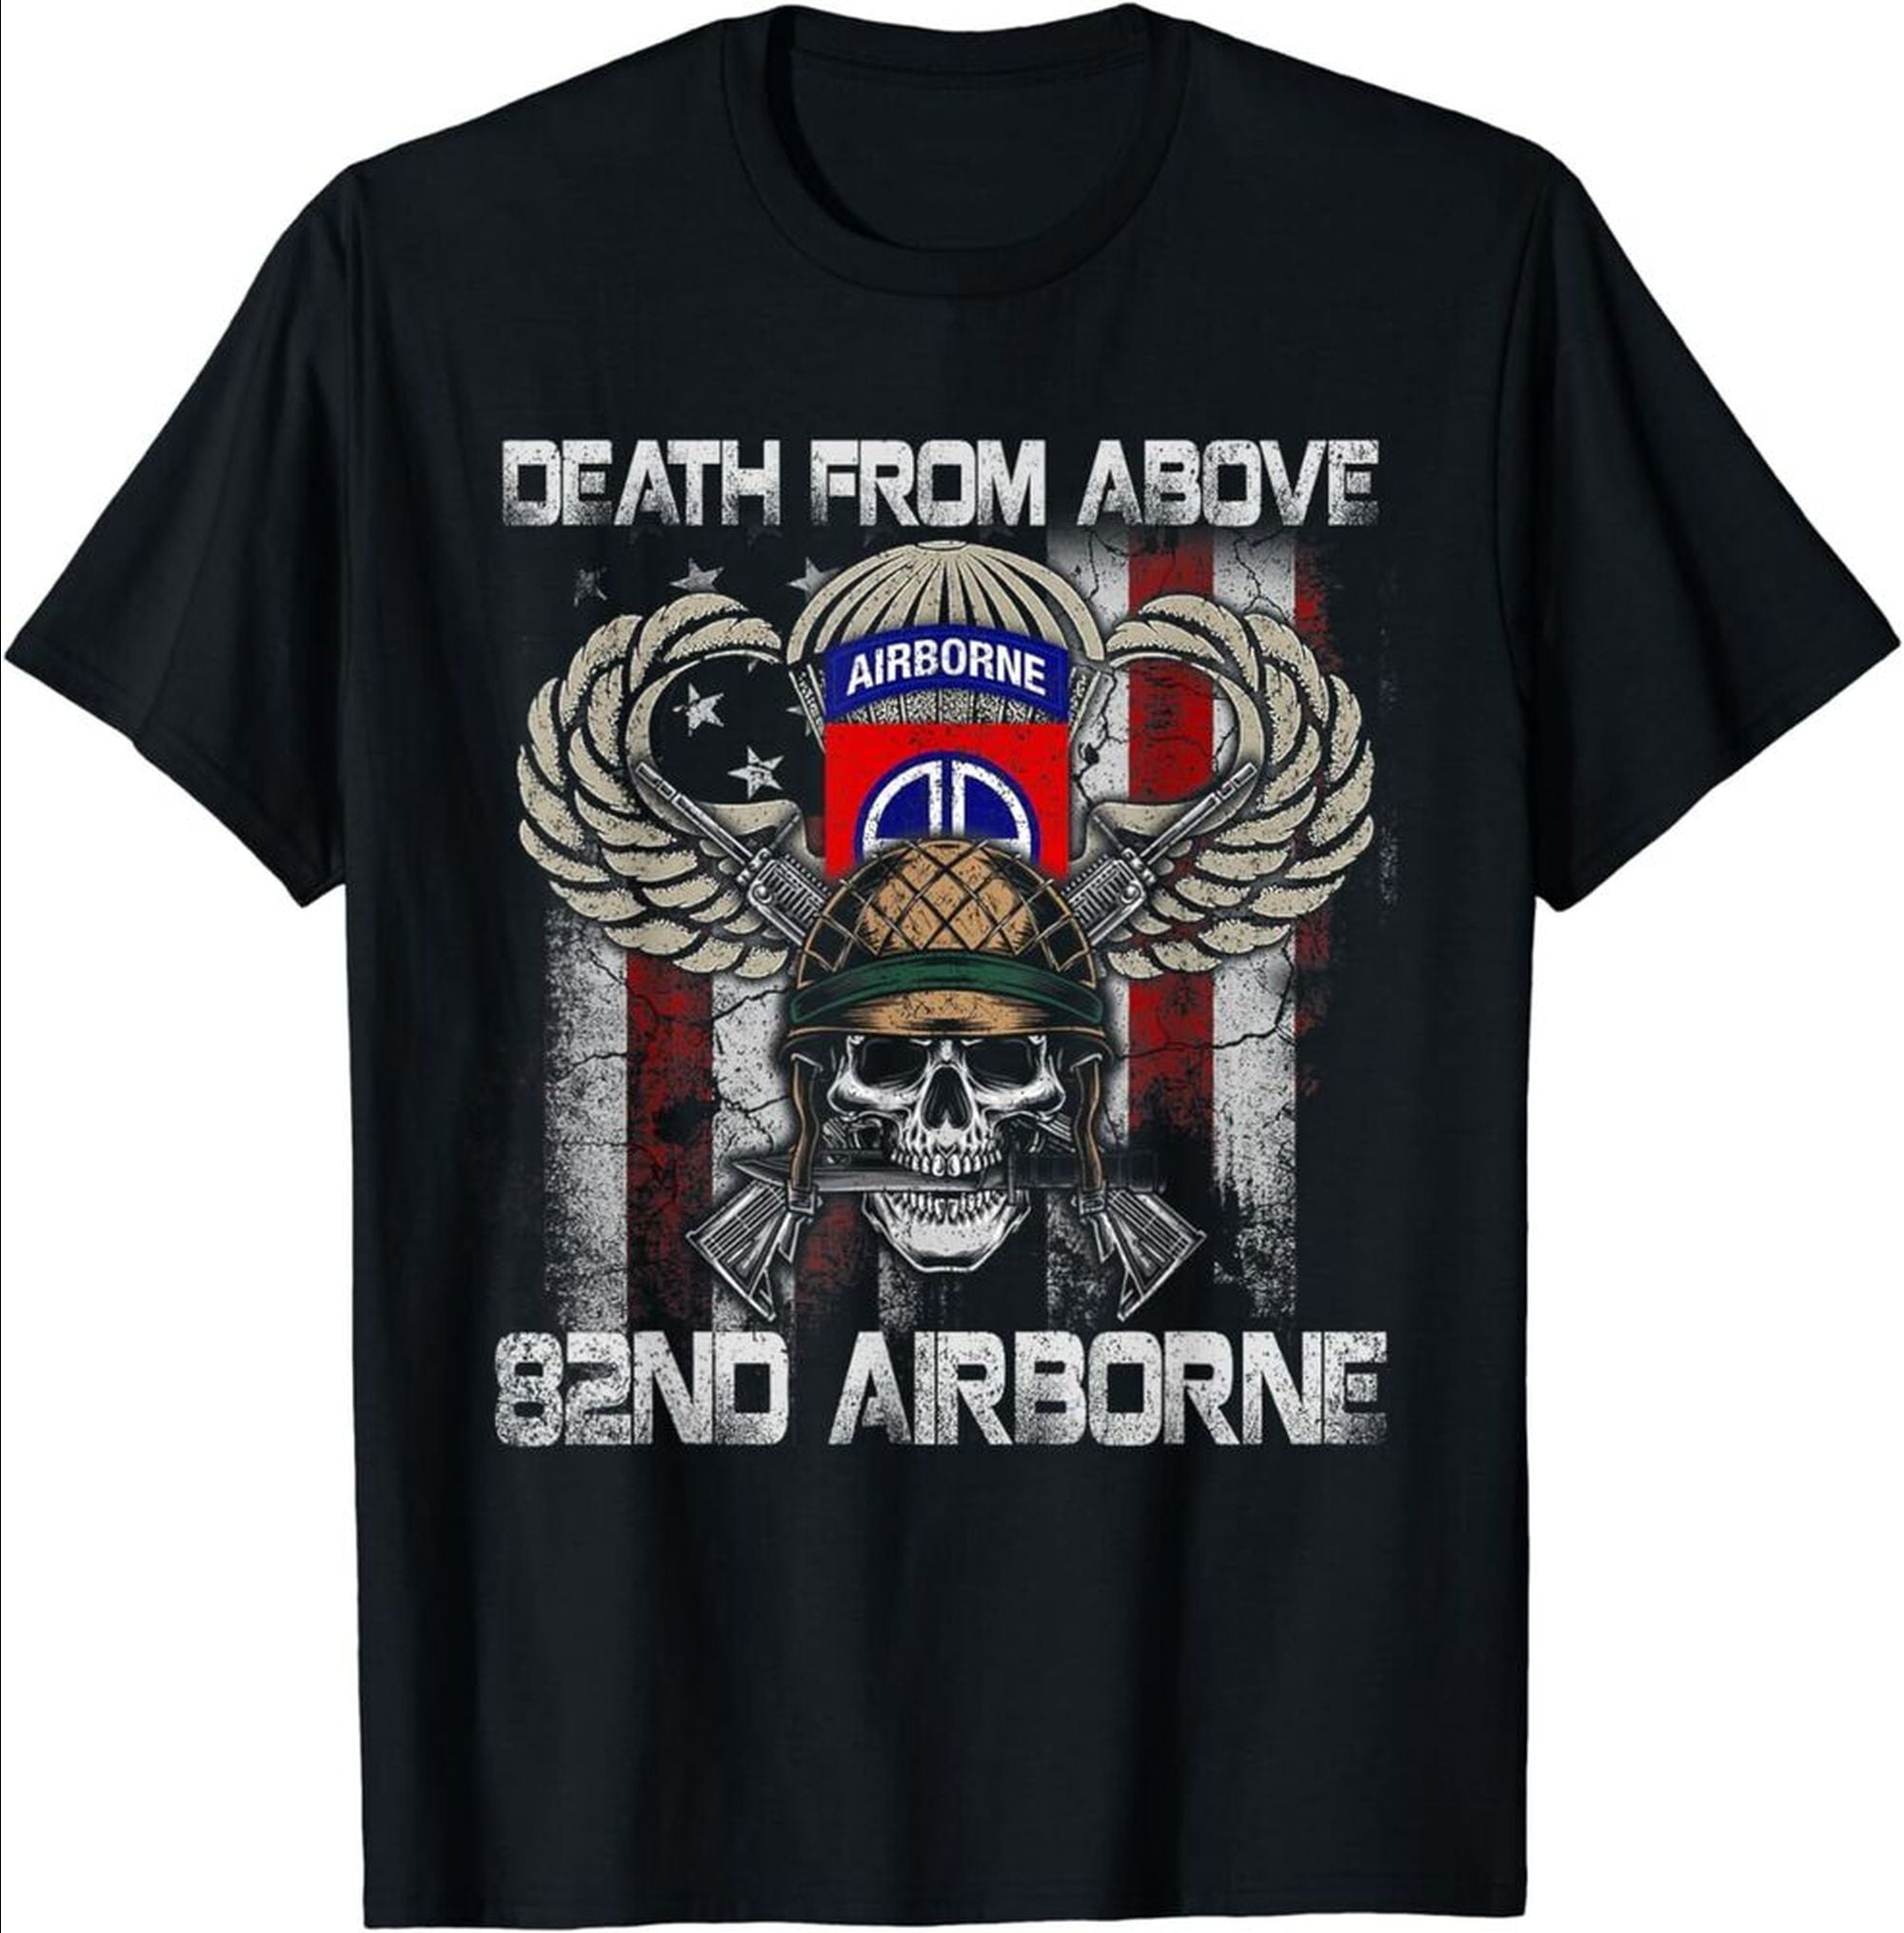 82nd Airborne Division Veteran Tribute T-Shirt - A Timeless Homage ...